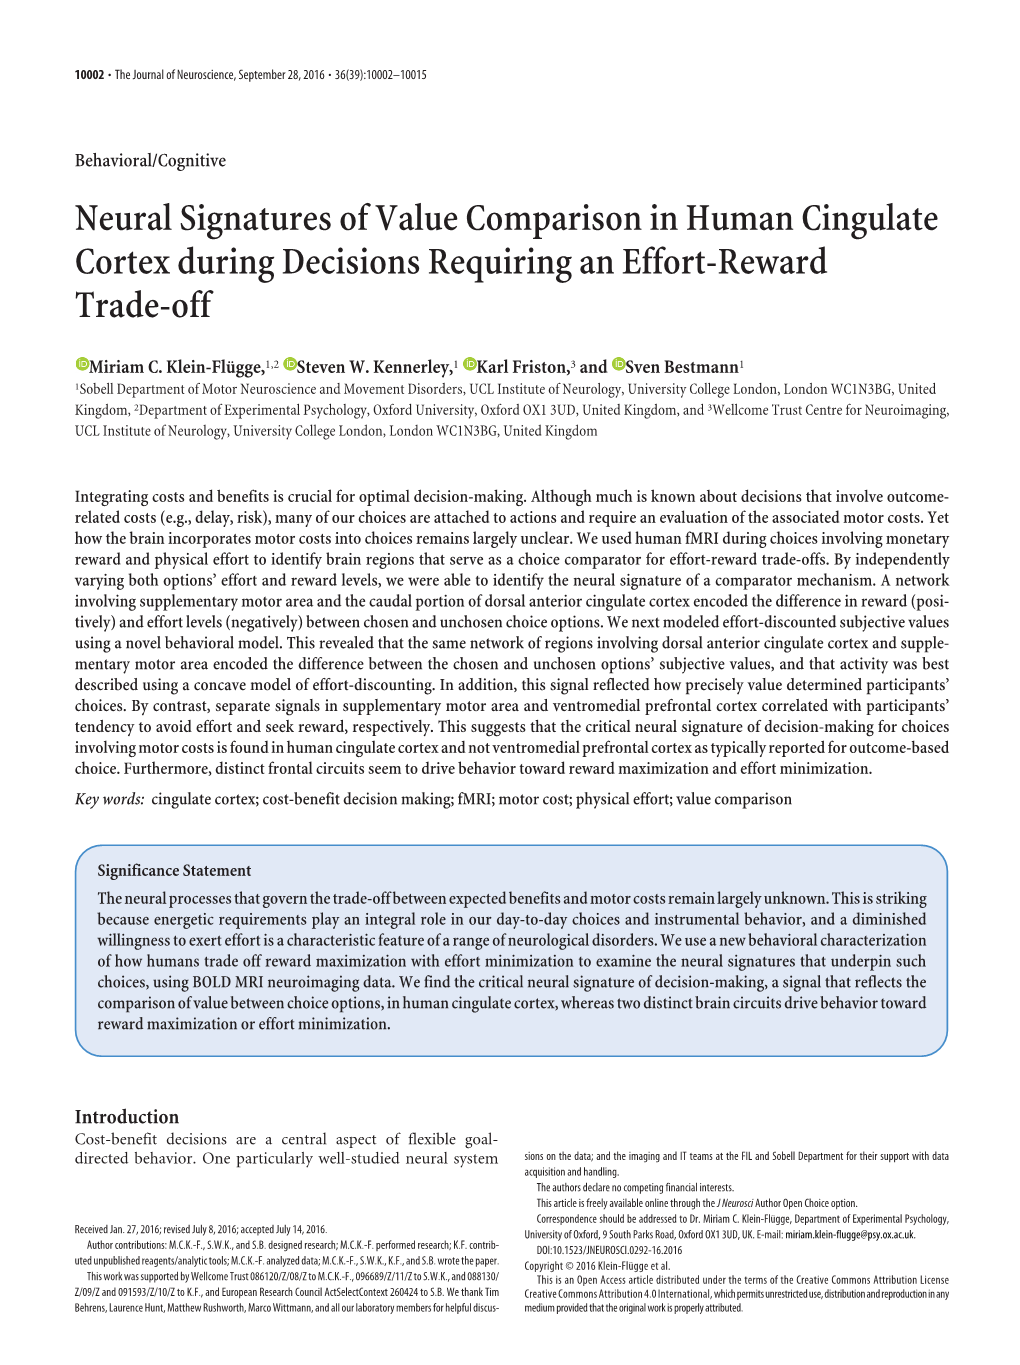 Neural Signatures of Value Comparison in Human Cingulate Cortex During Decisions Requiring an Effort-Reward Trade-Off